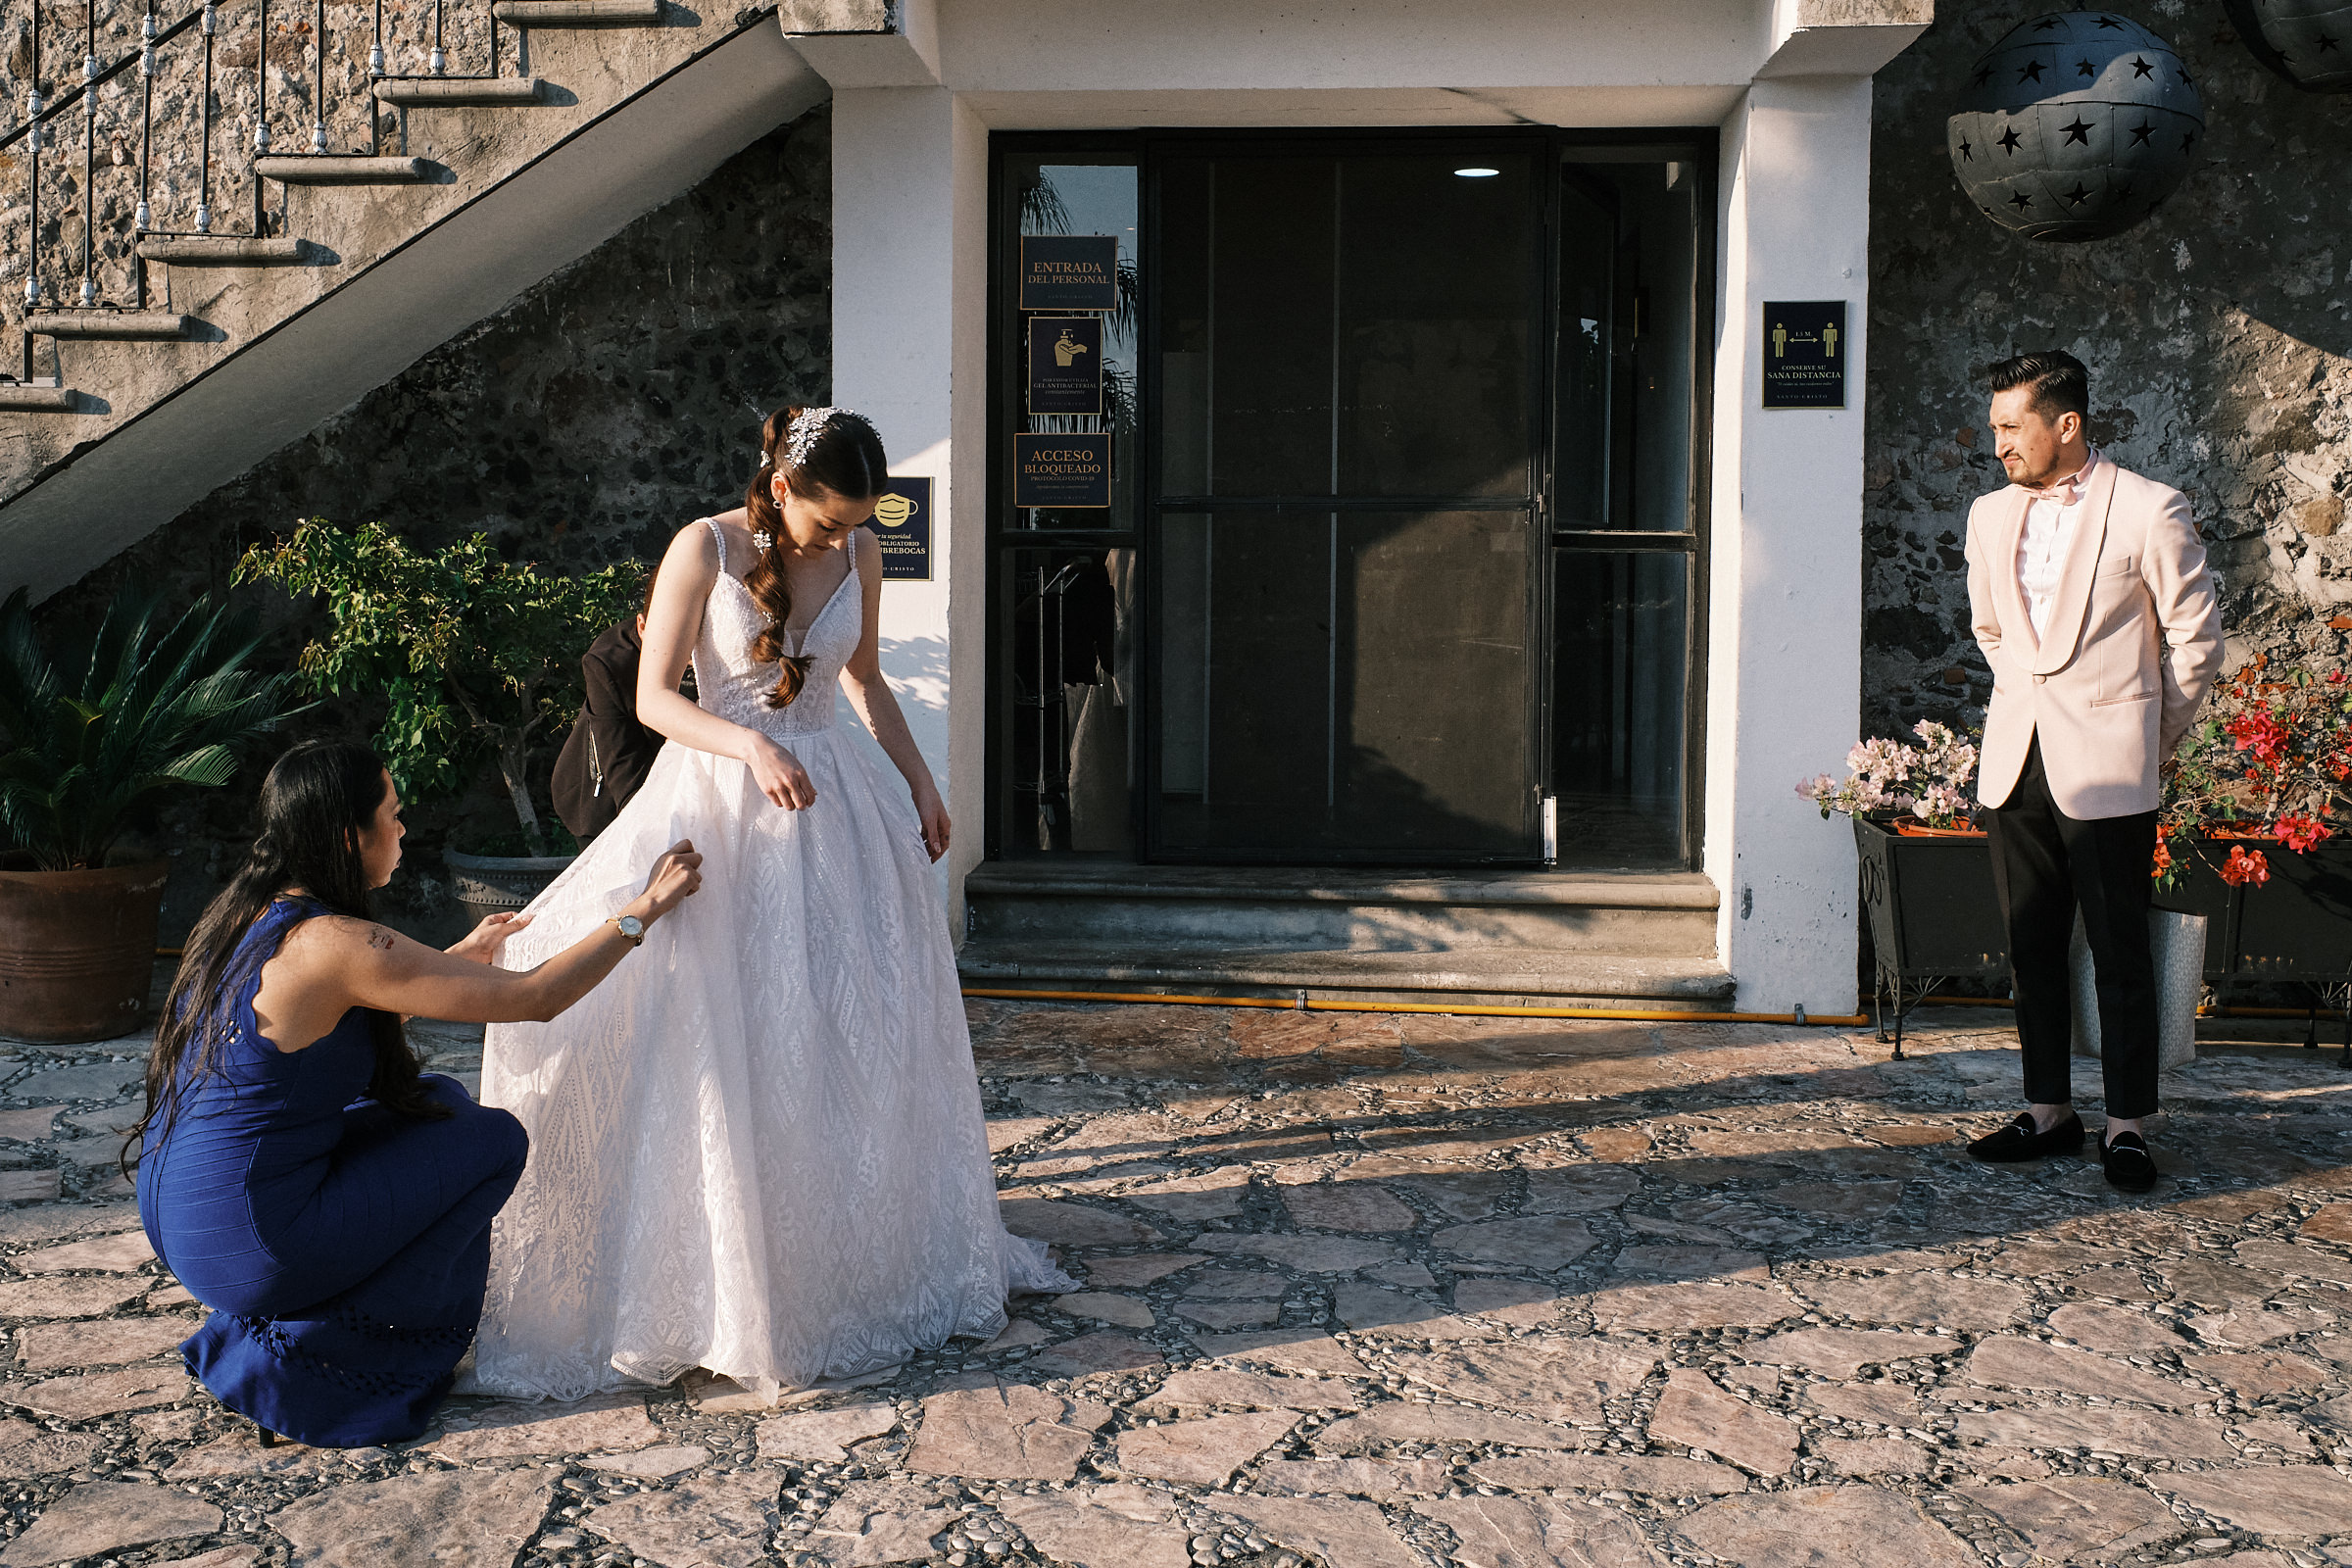 Bride Stops To Fix Her Dress Prior To The Entrance At Reception